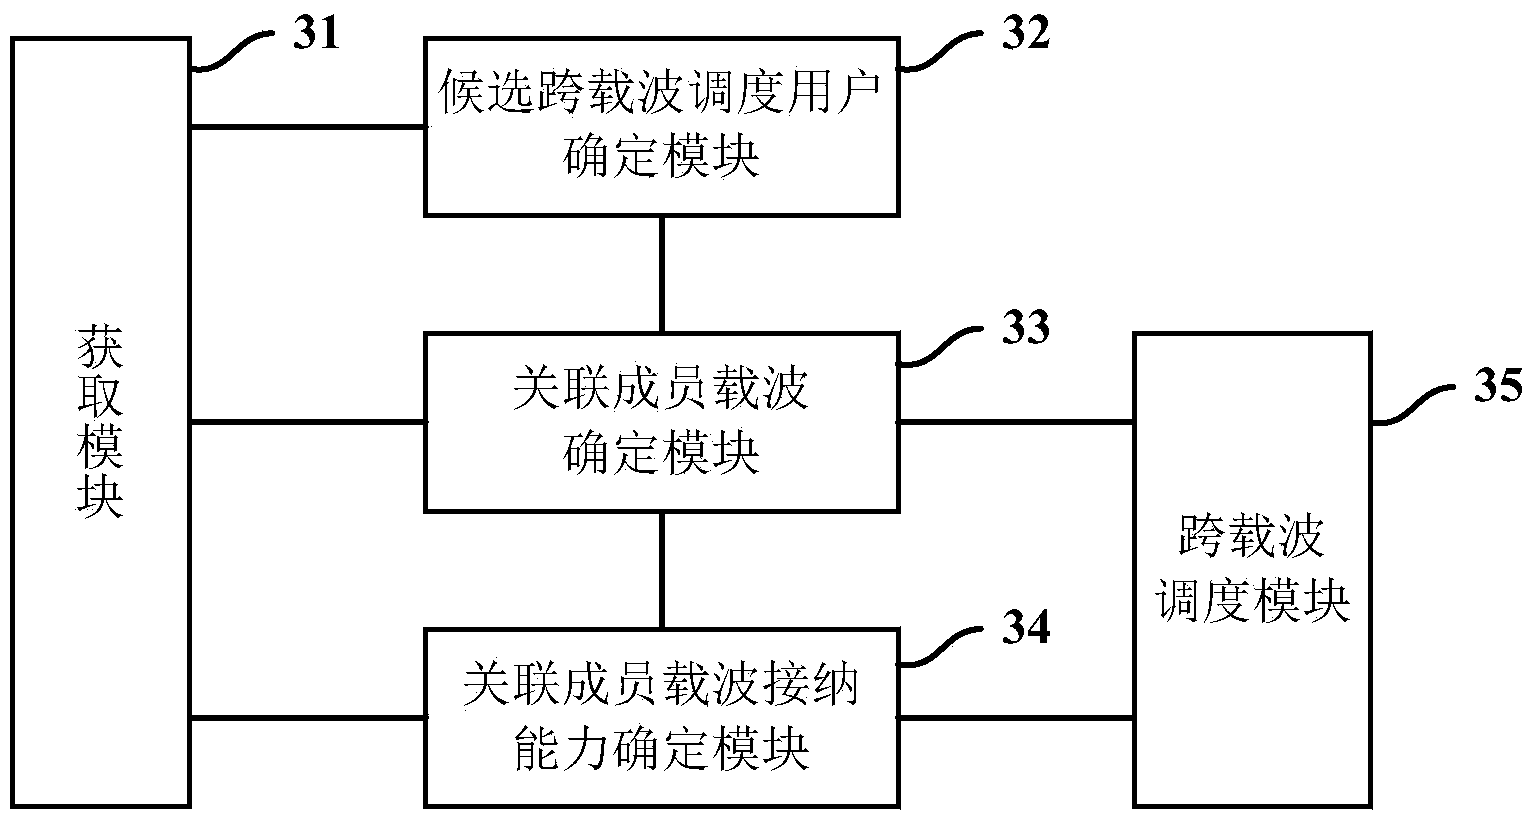 CA (Carrier Aggregation)-based across-carrier scheduling method and CA-based across-carrier scheduling device